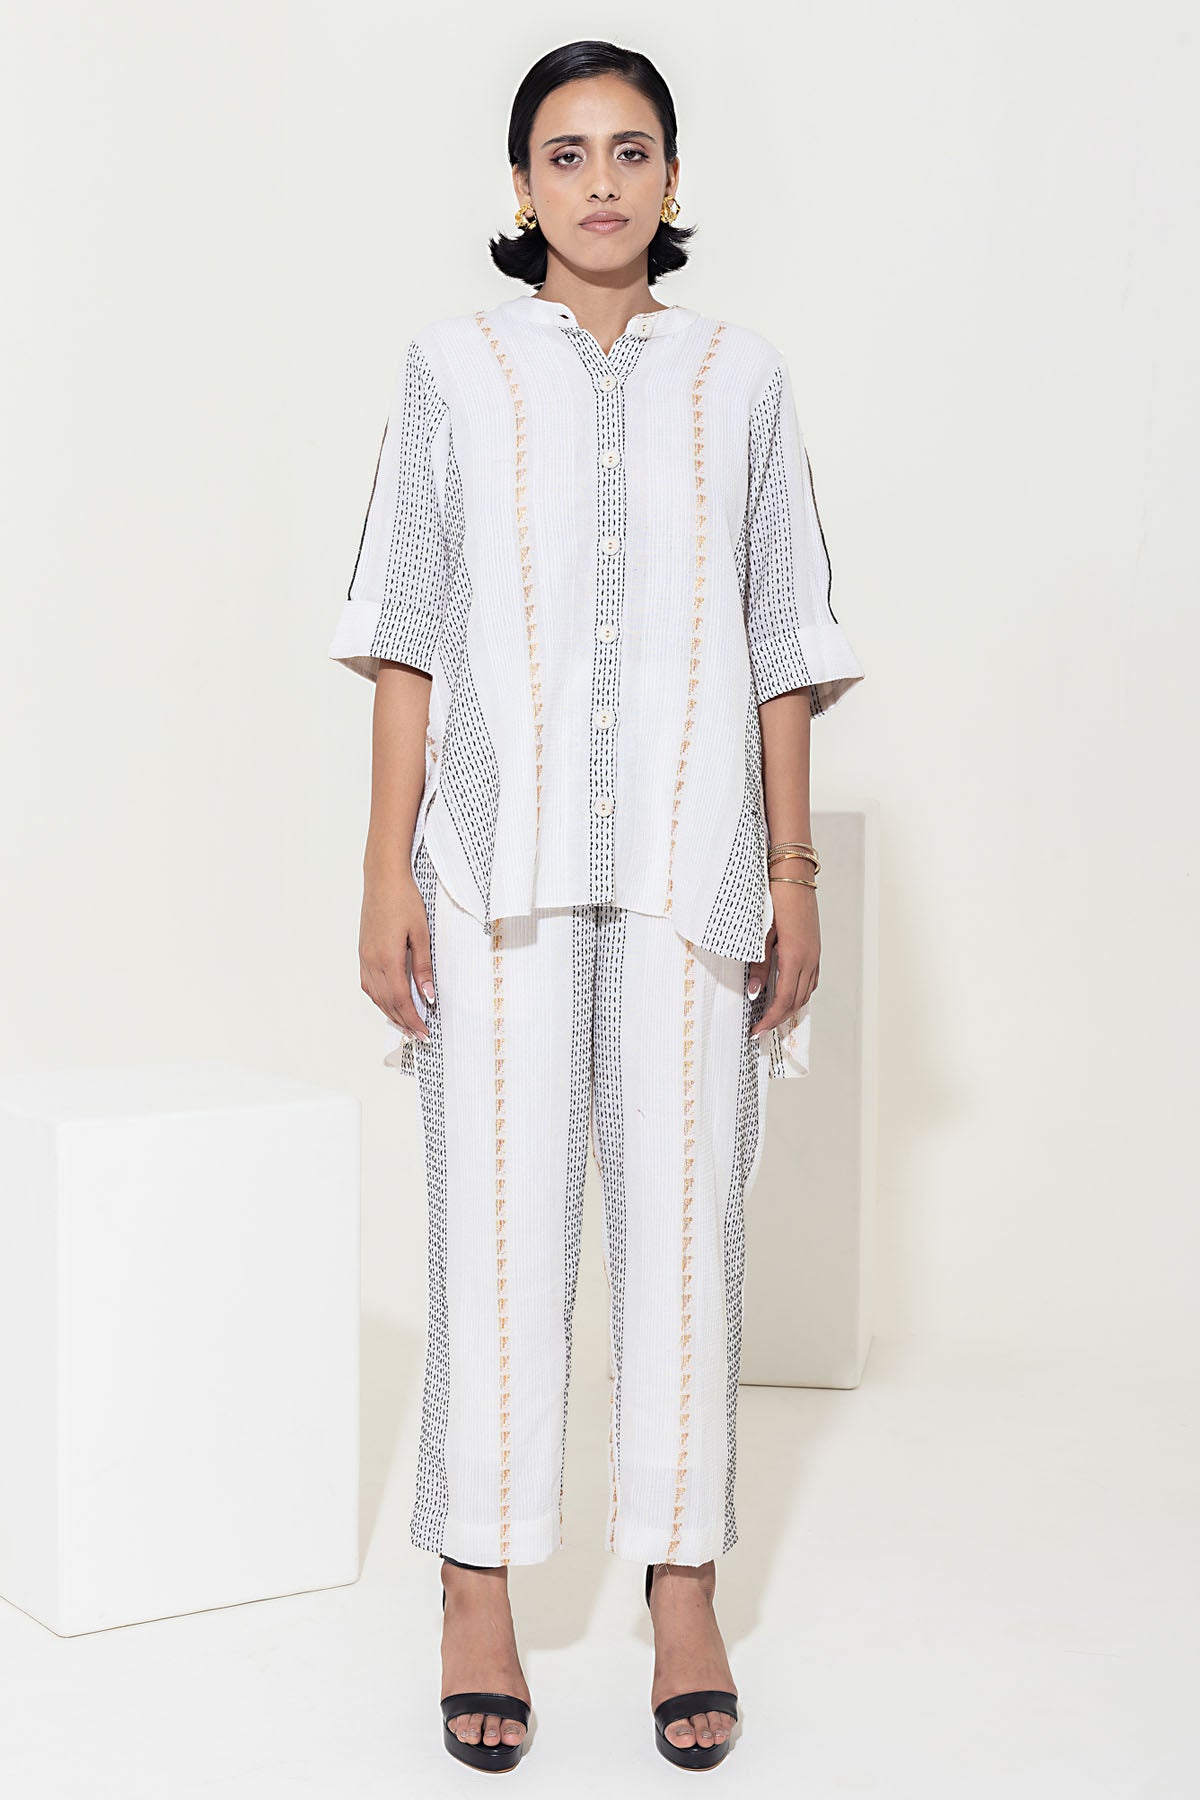 Designer Kusmi Ivory Gleam: Breezy Button-Down with Sequins For Women at ScrollnShops